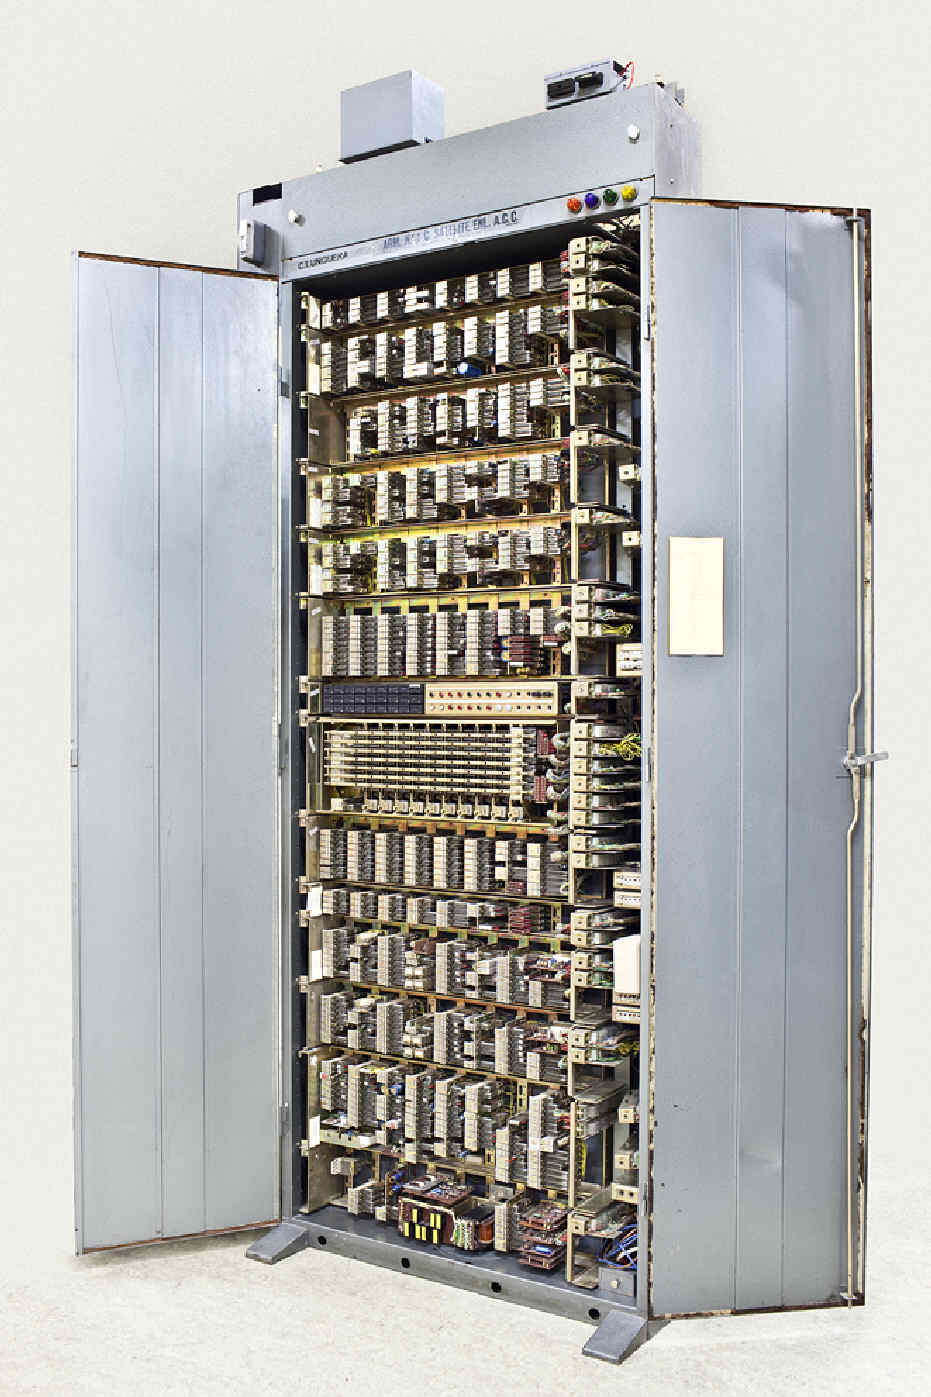 Switching equipment of the so-called Cross-Bar system. In 1969 the first rural PC-32 switchgear began to be installed.